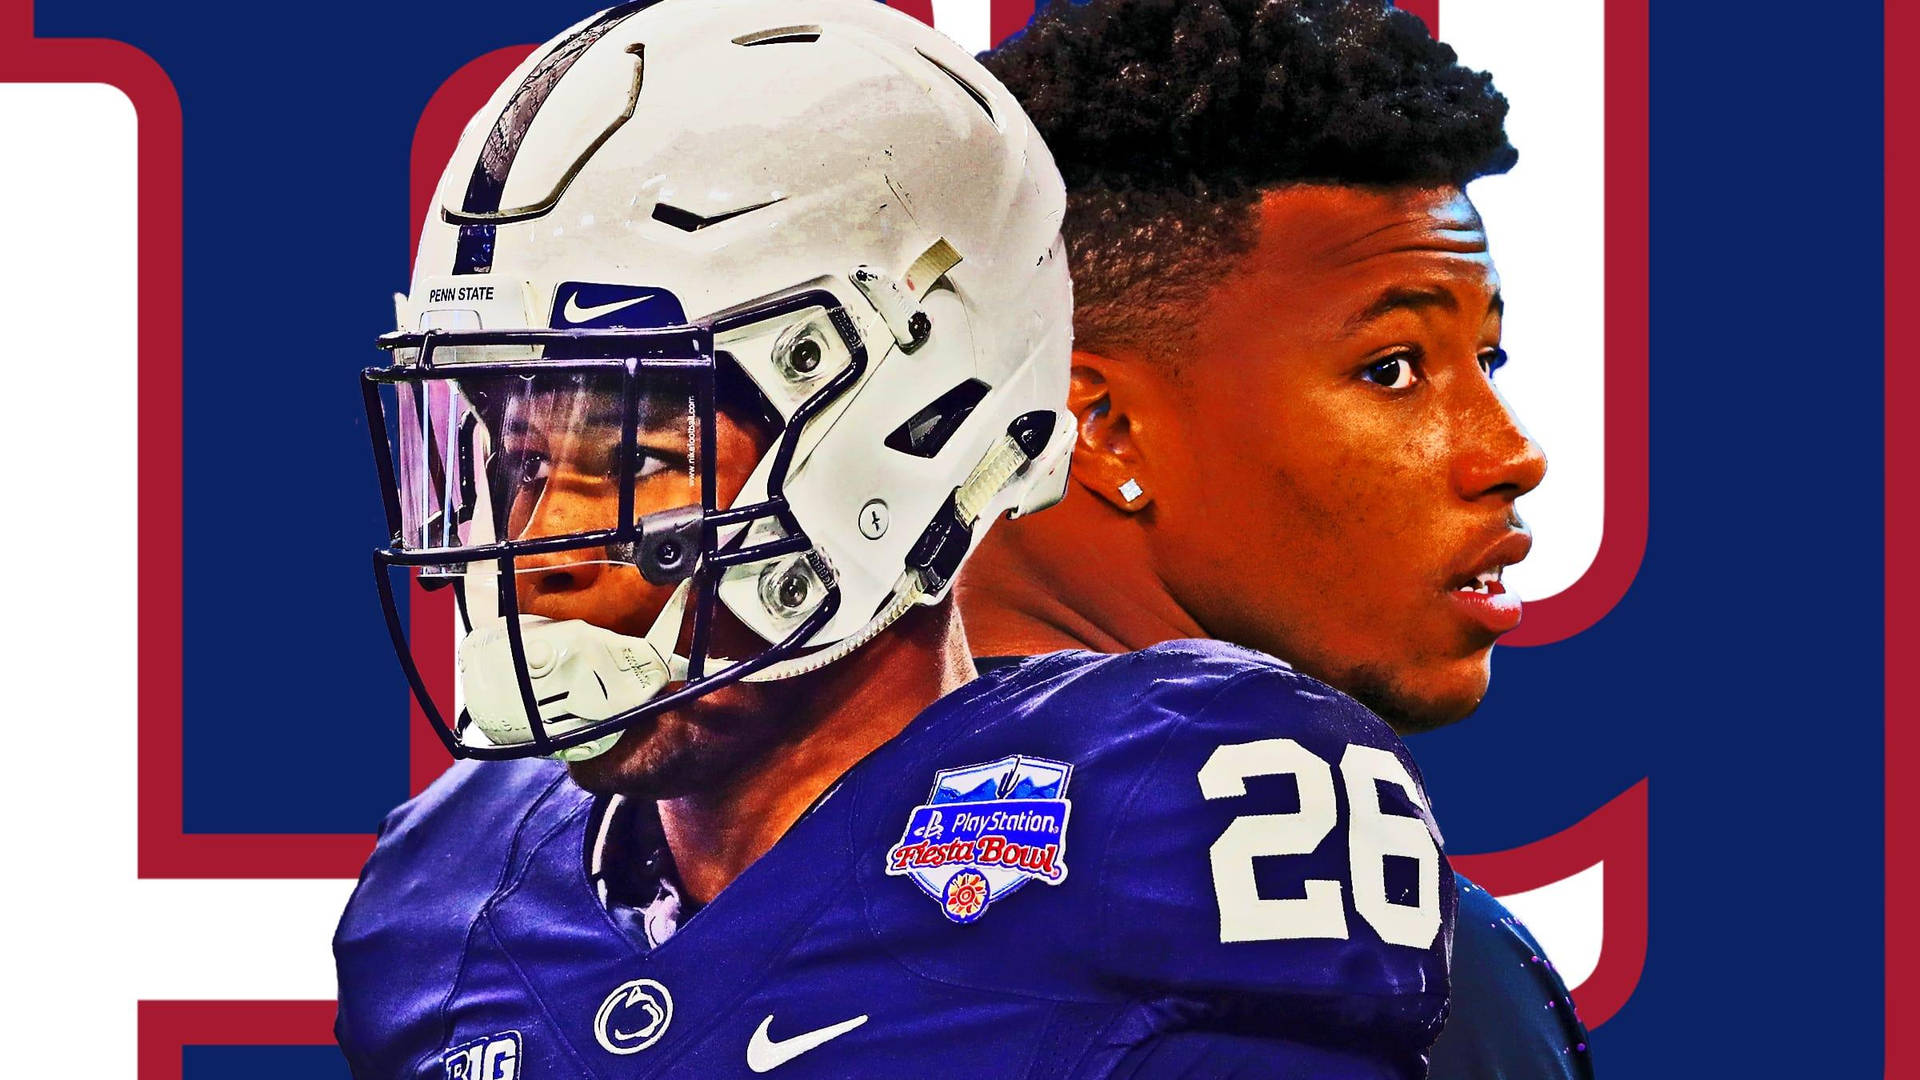 Free download Saquon Barkley Wallpapers Top Free Saquon Barkley Backgrounds  1100x1100 for your Desktop Mobile  Tablet  Explore 38 Saquon Barkley  Wallpapers  Saquon Barkley Wallpaper Ross Barkley Wallpapers Charles  Barkley Wallpapers